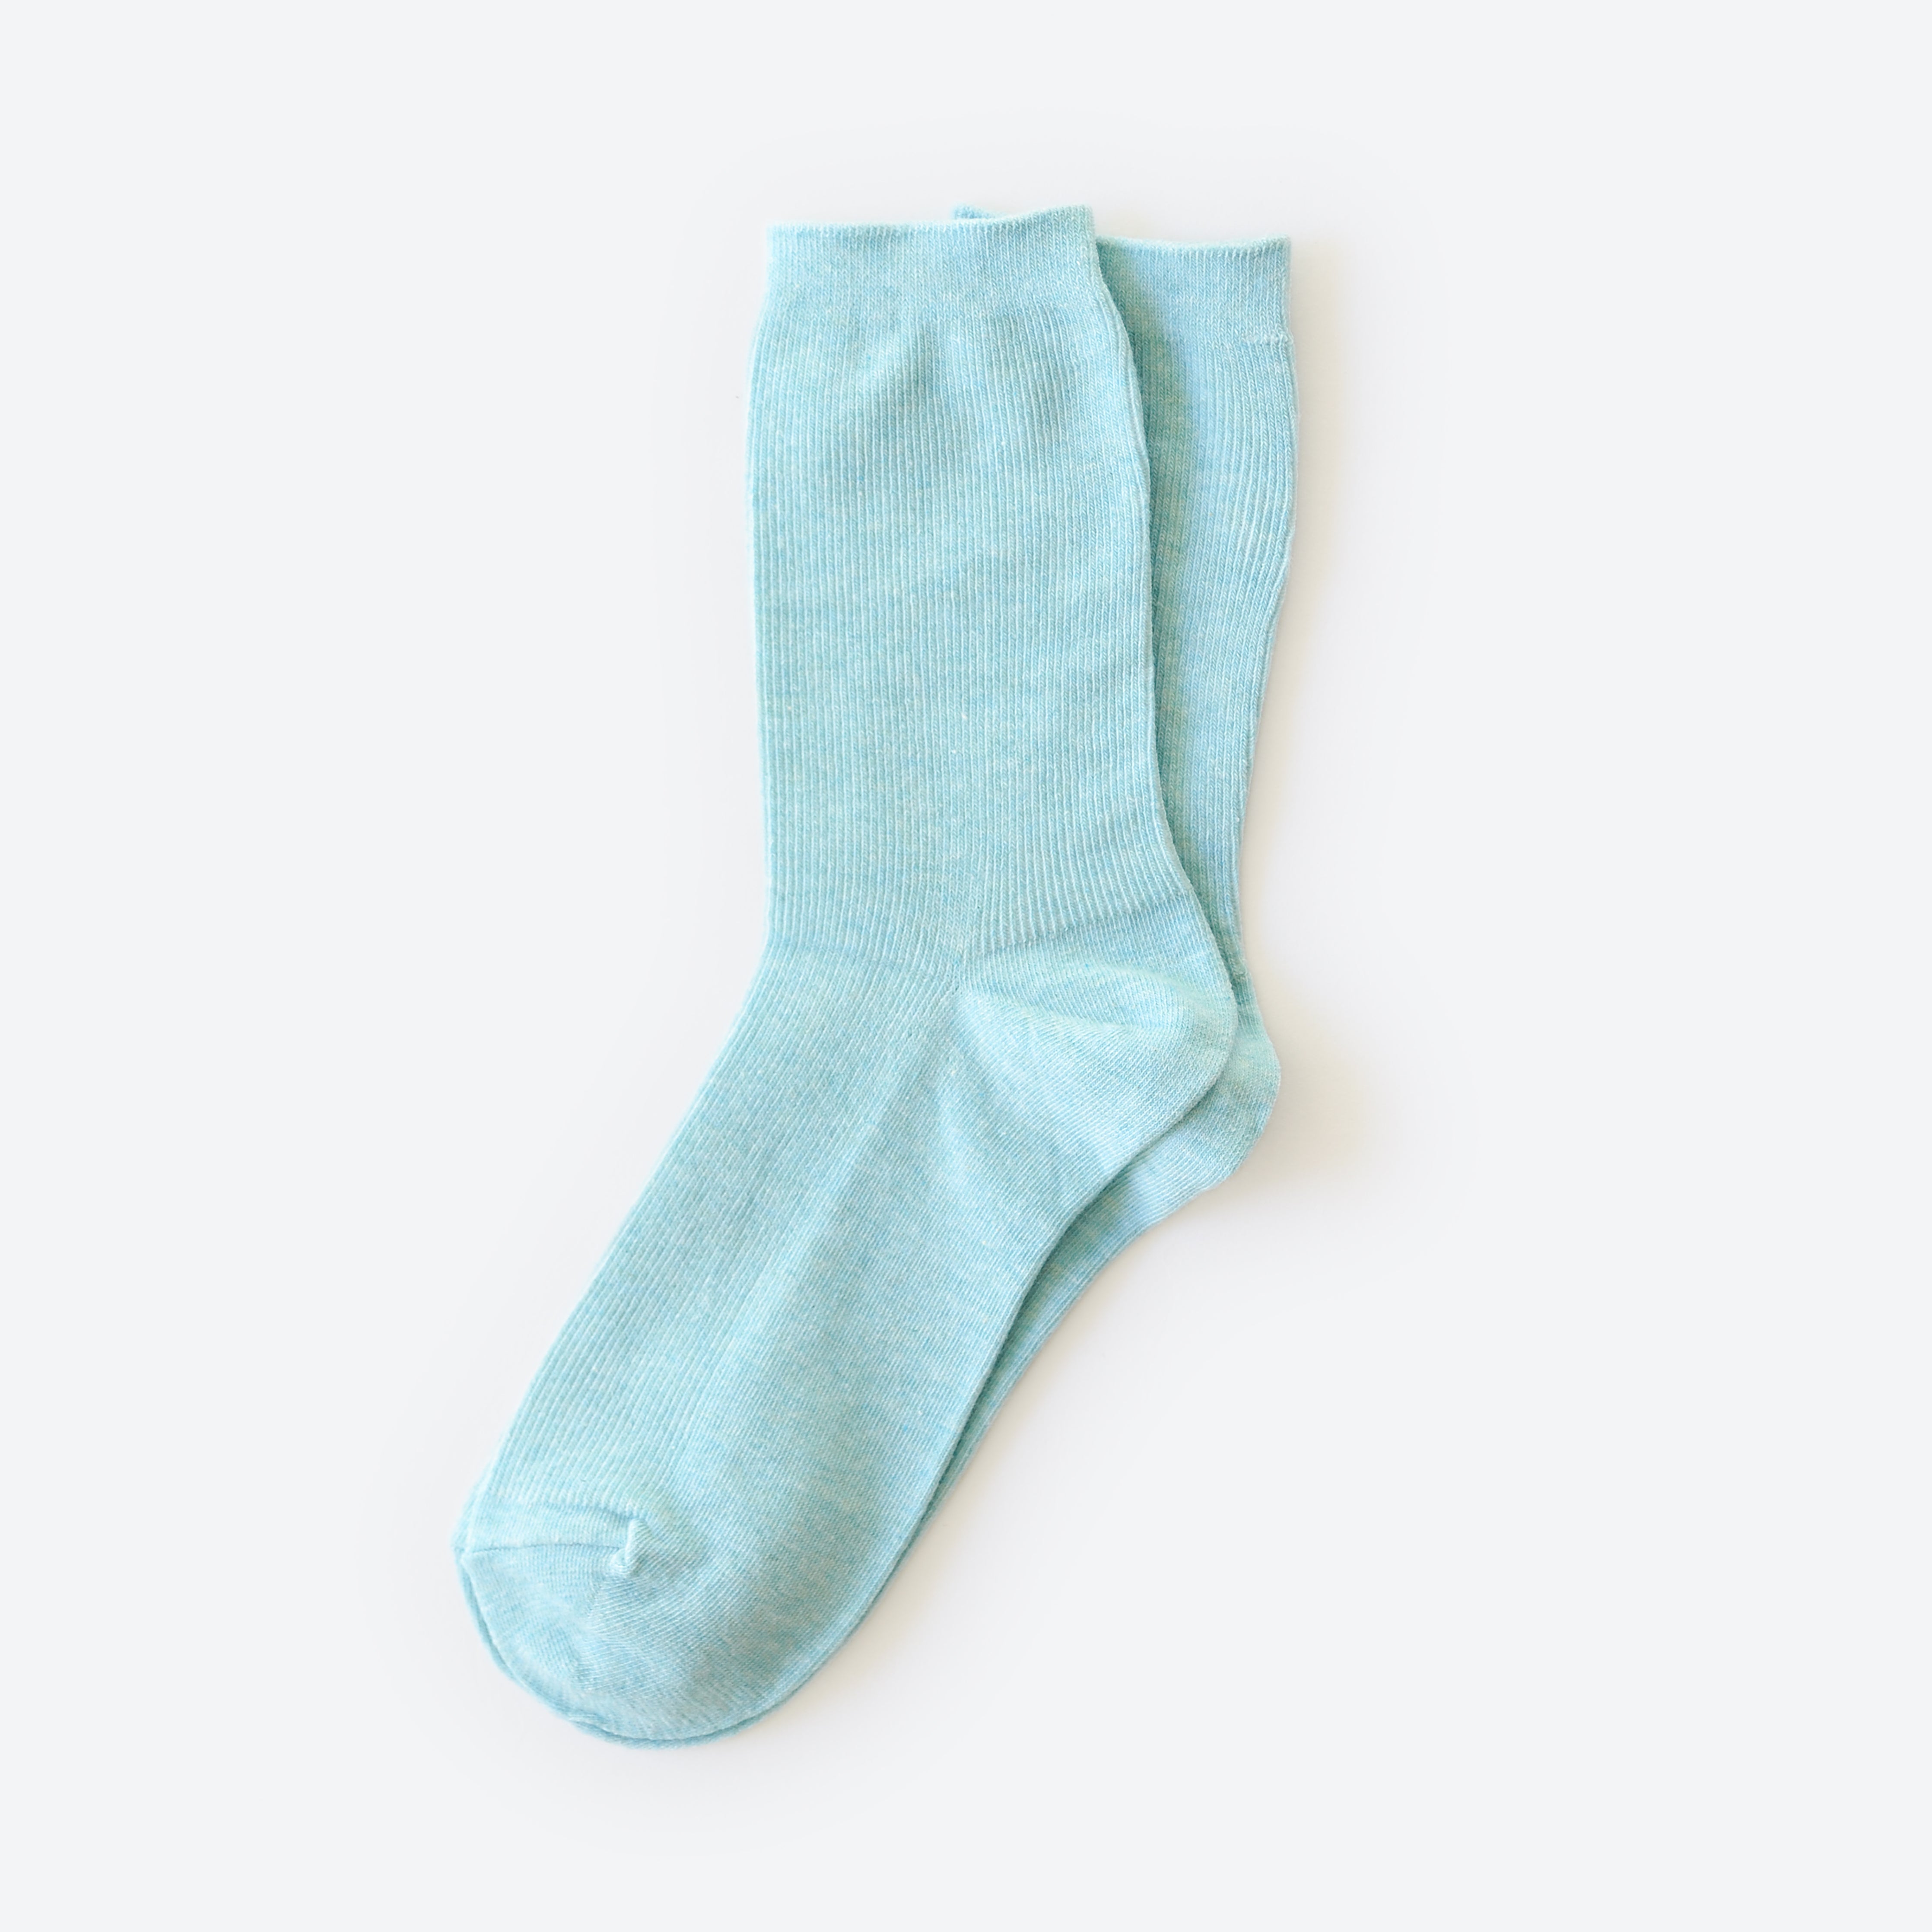 Hooray Sock Co.&#39;s Seafoam Crew Socks: Calm and easy style with Everyday Cotton. Shorter crew length. 80% cotton, 20% spandex. Made in South Korea. Small (Women&#39;s 4-10).